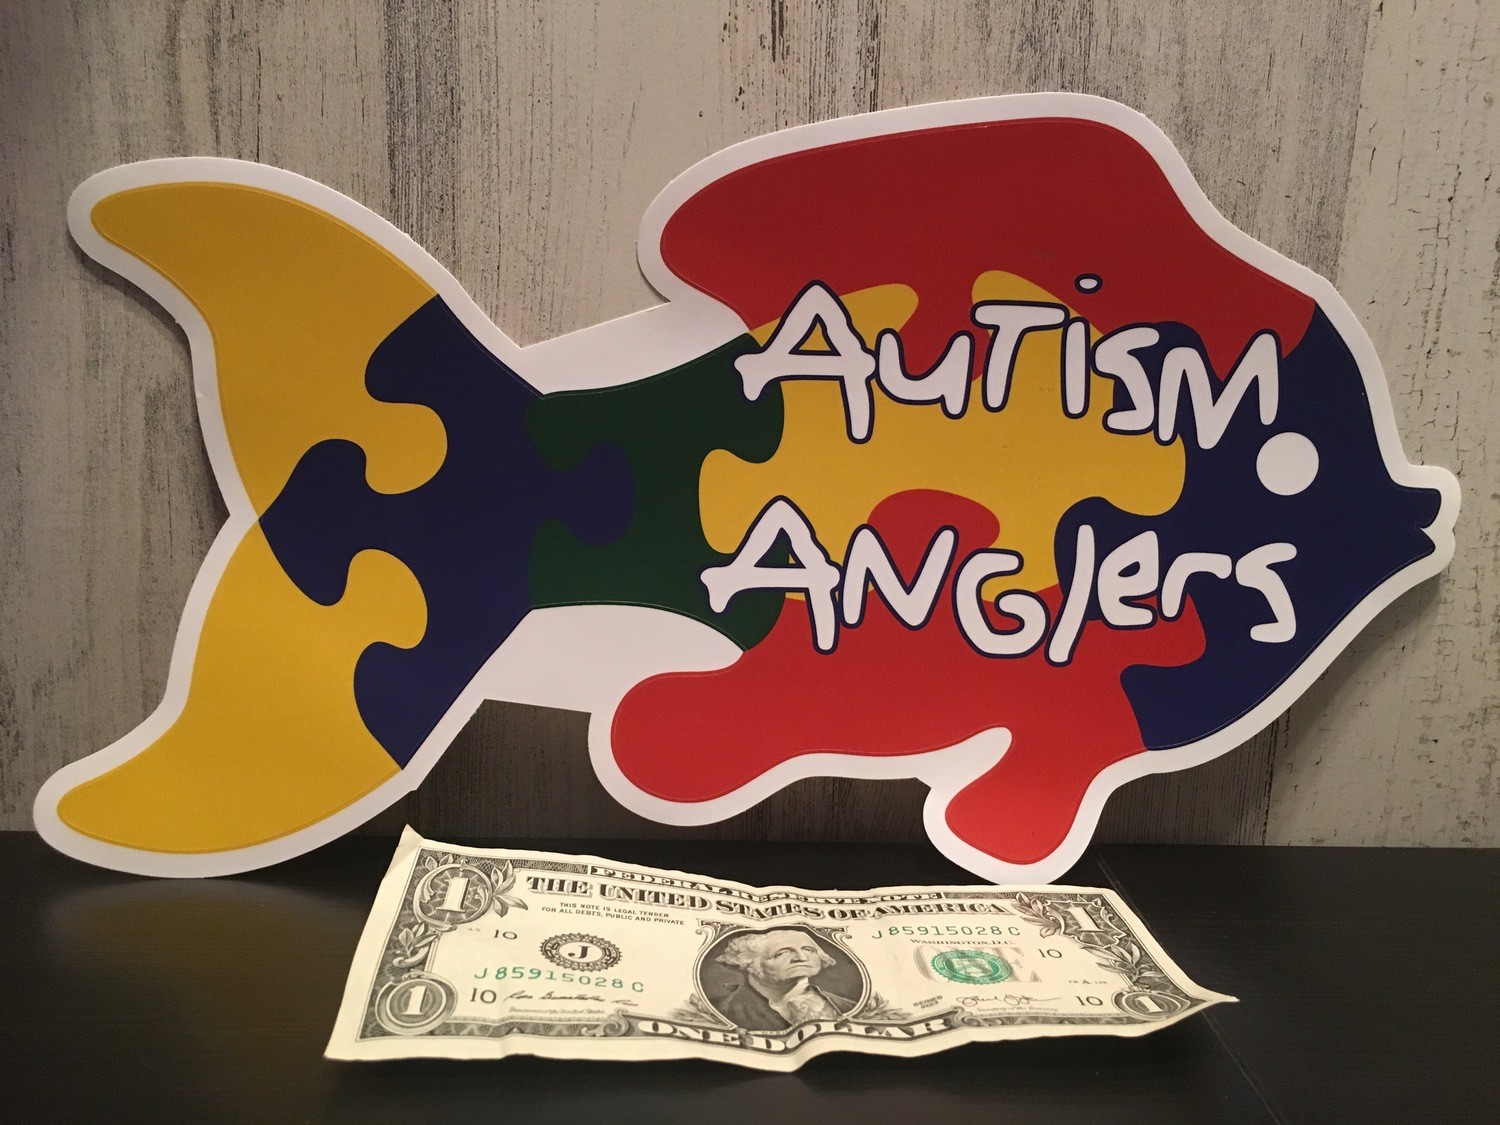 12" Autism Anglers Decal